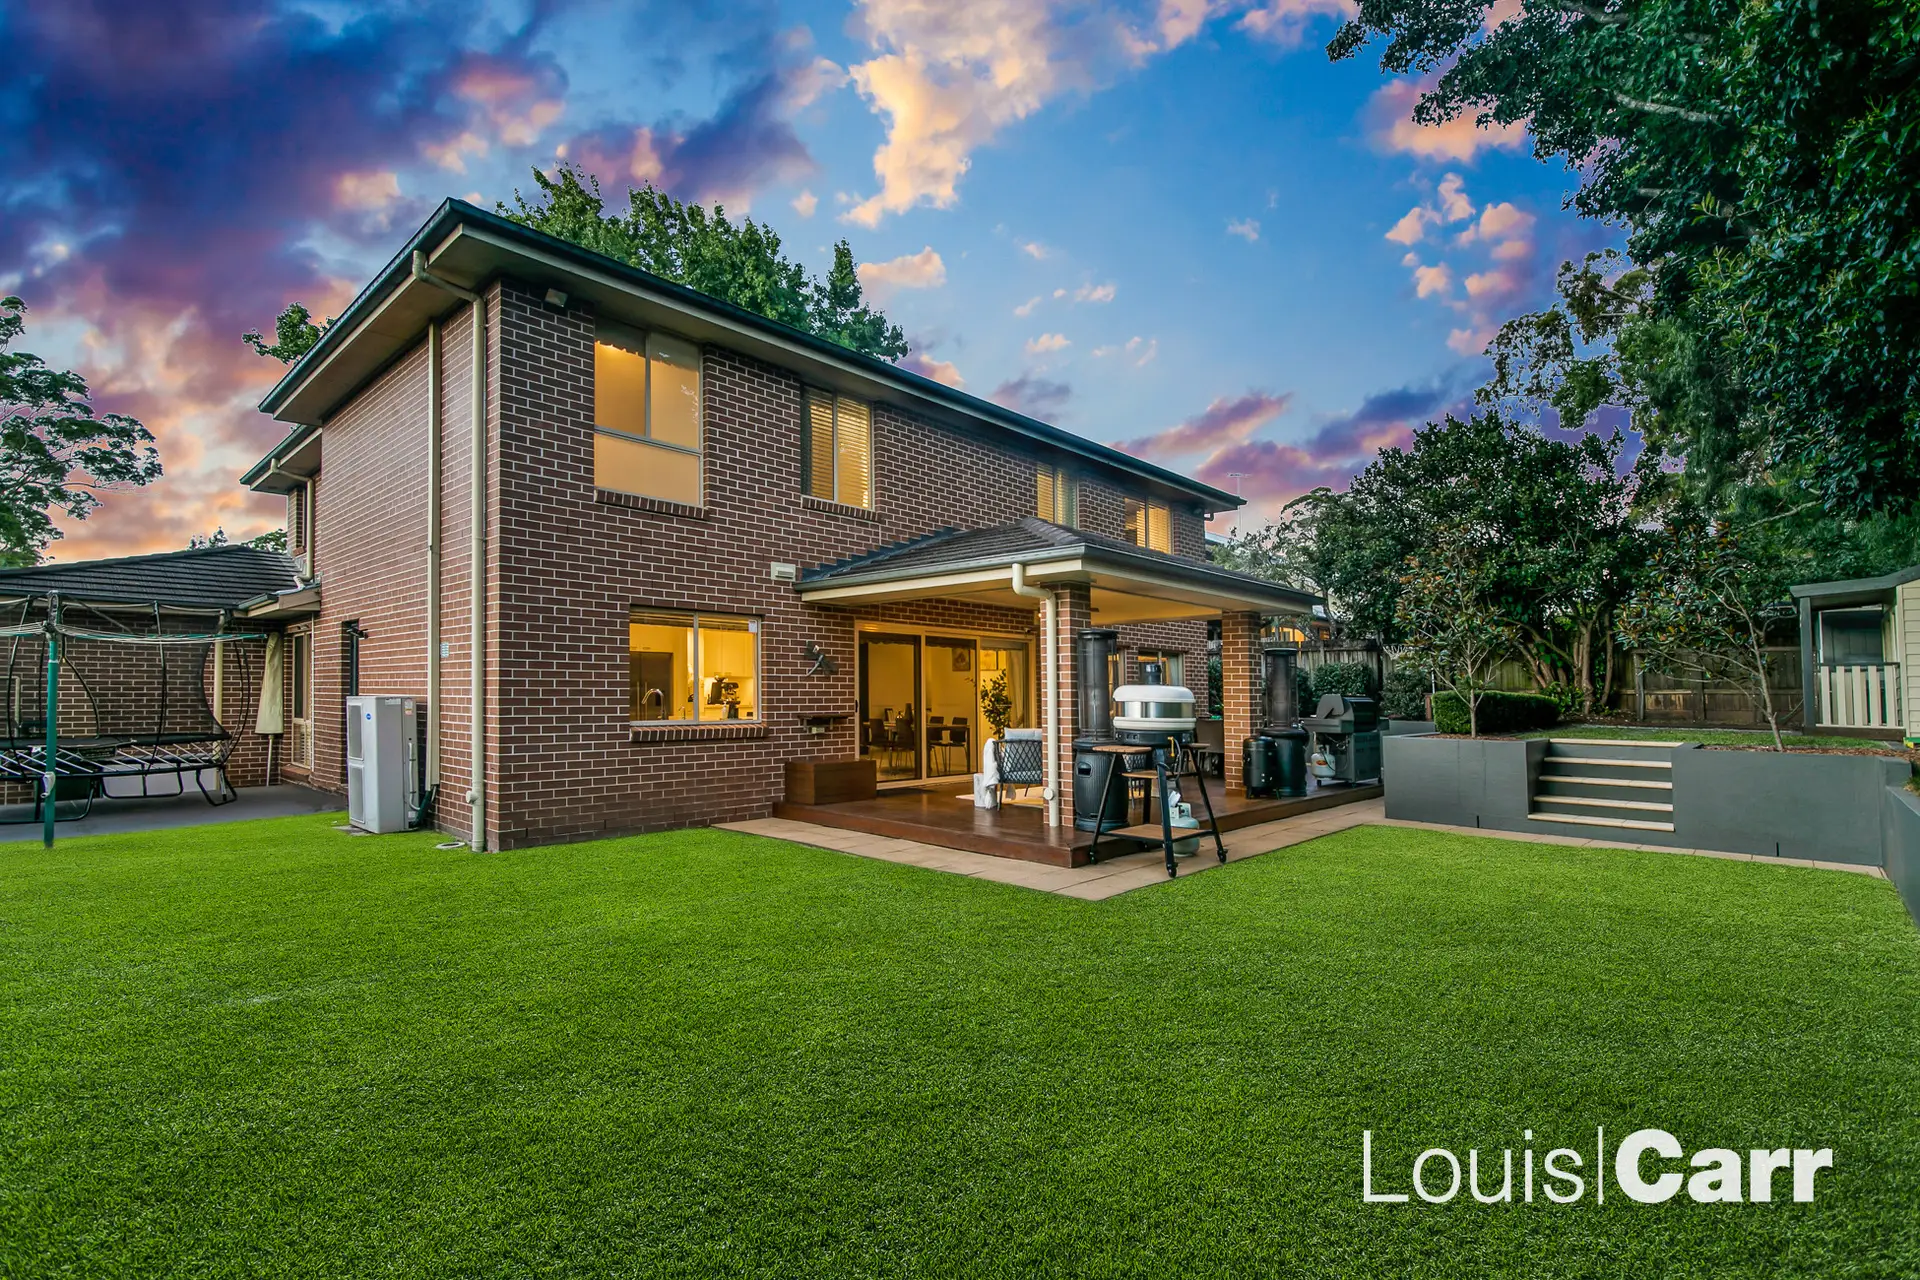 Photo #11: 15 Valda Street, West Pennant Hills - Sold by Louis Carr Real Estate